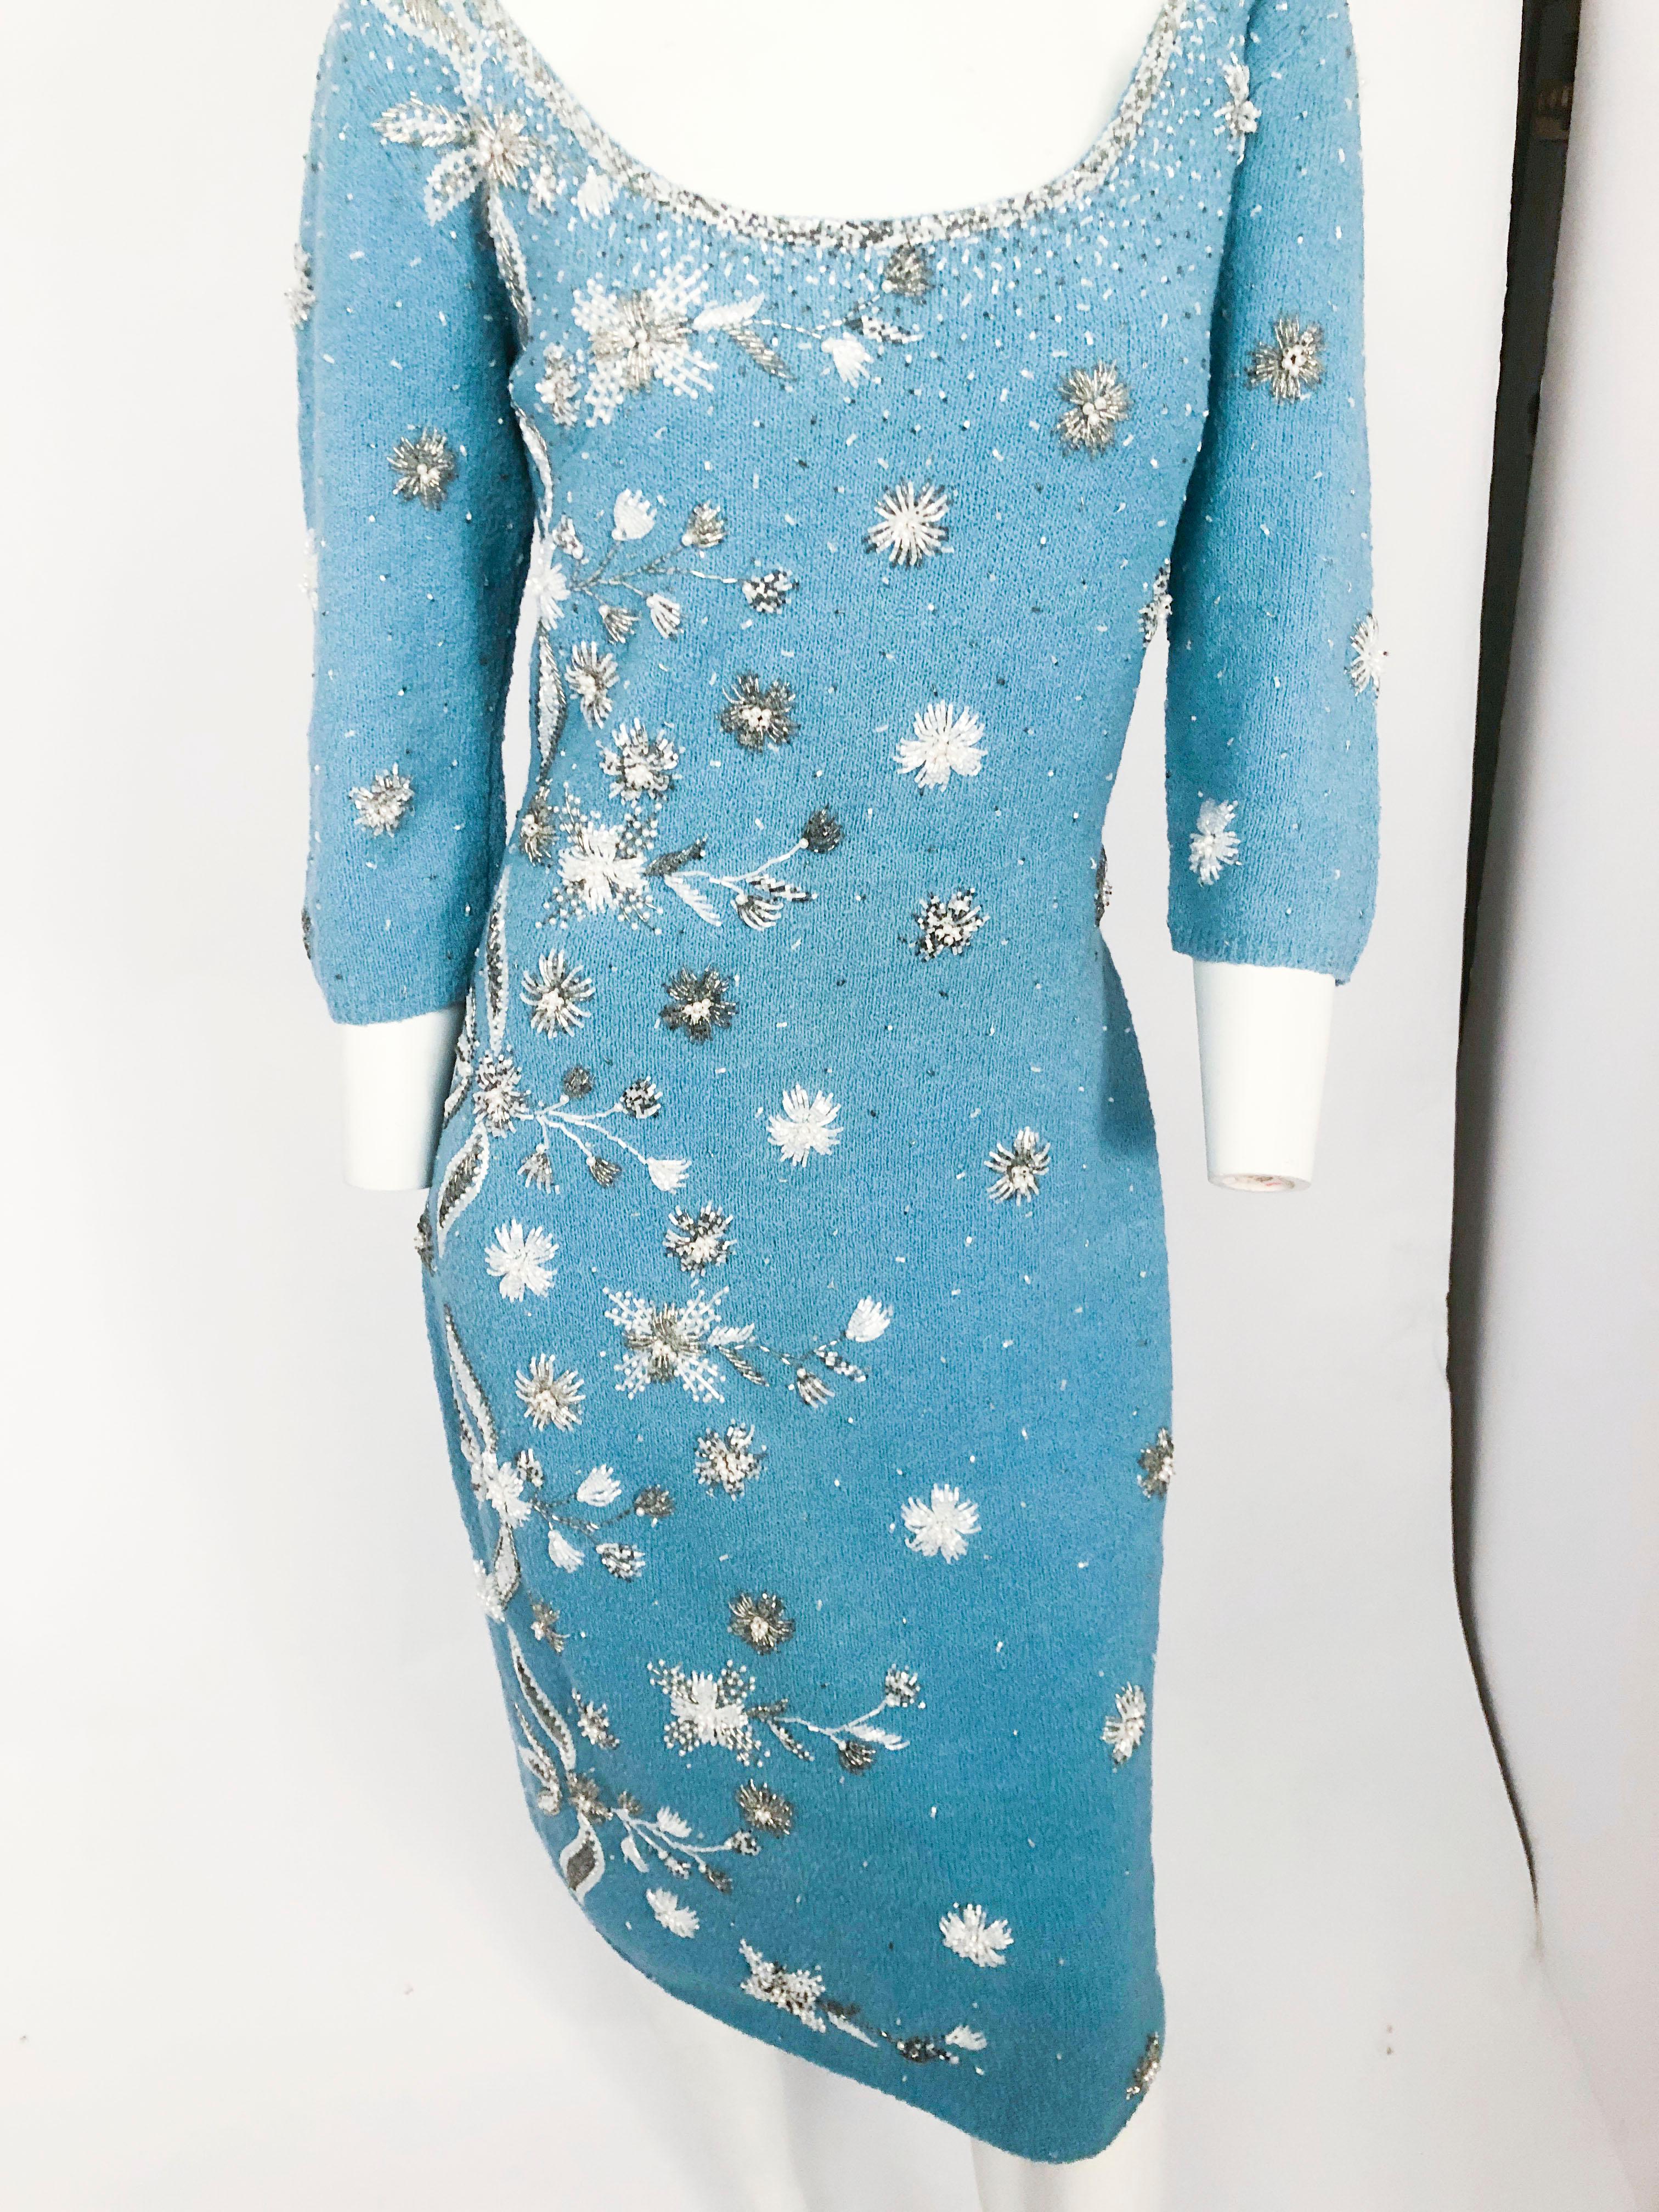 Blue 1950s Aqua Knit Dress with Hand Beading Accents For Sale